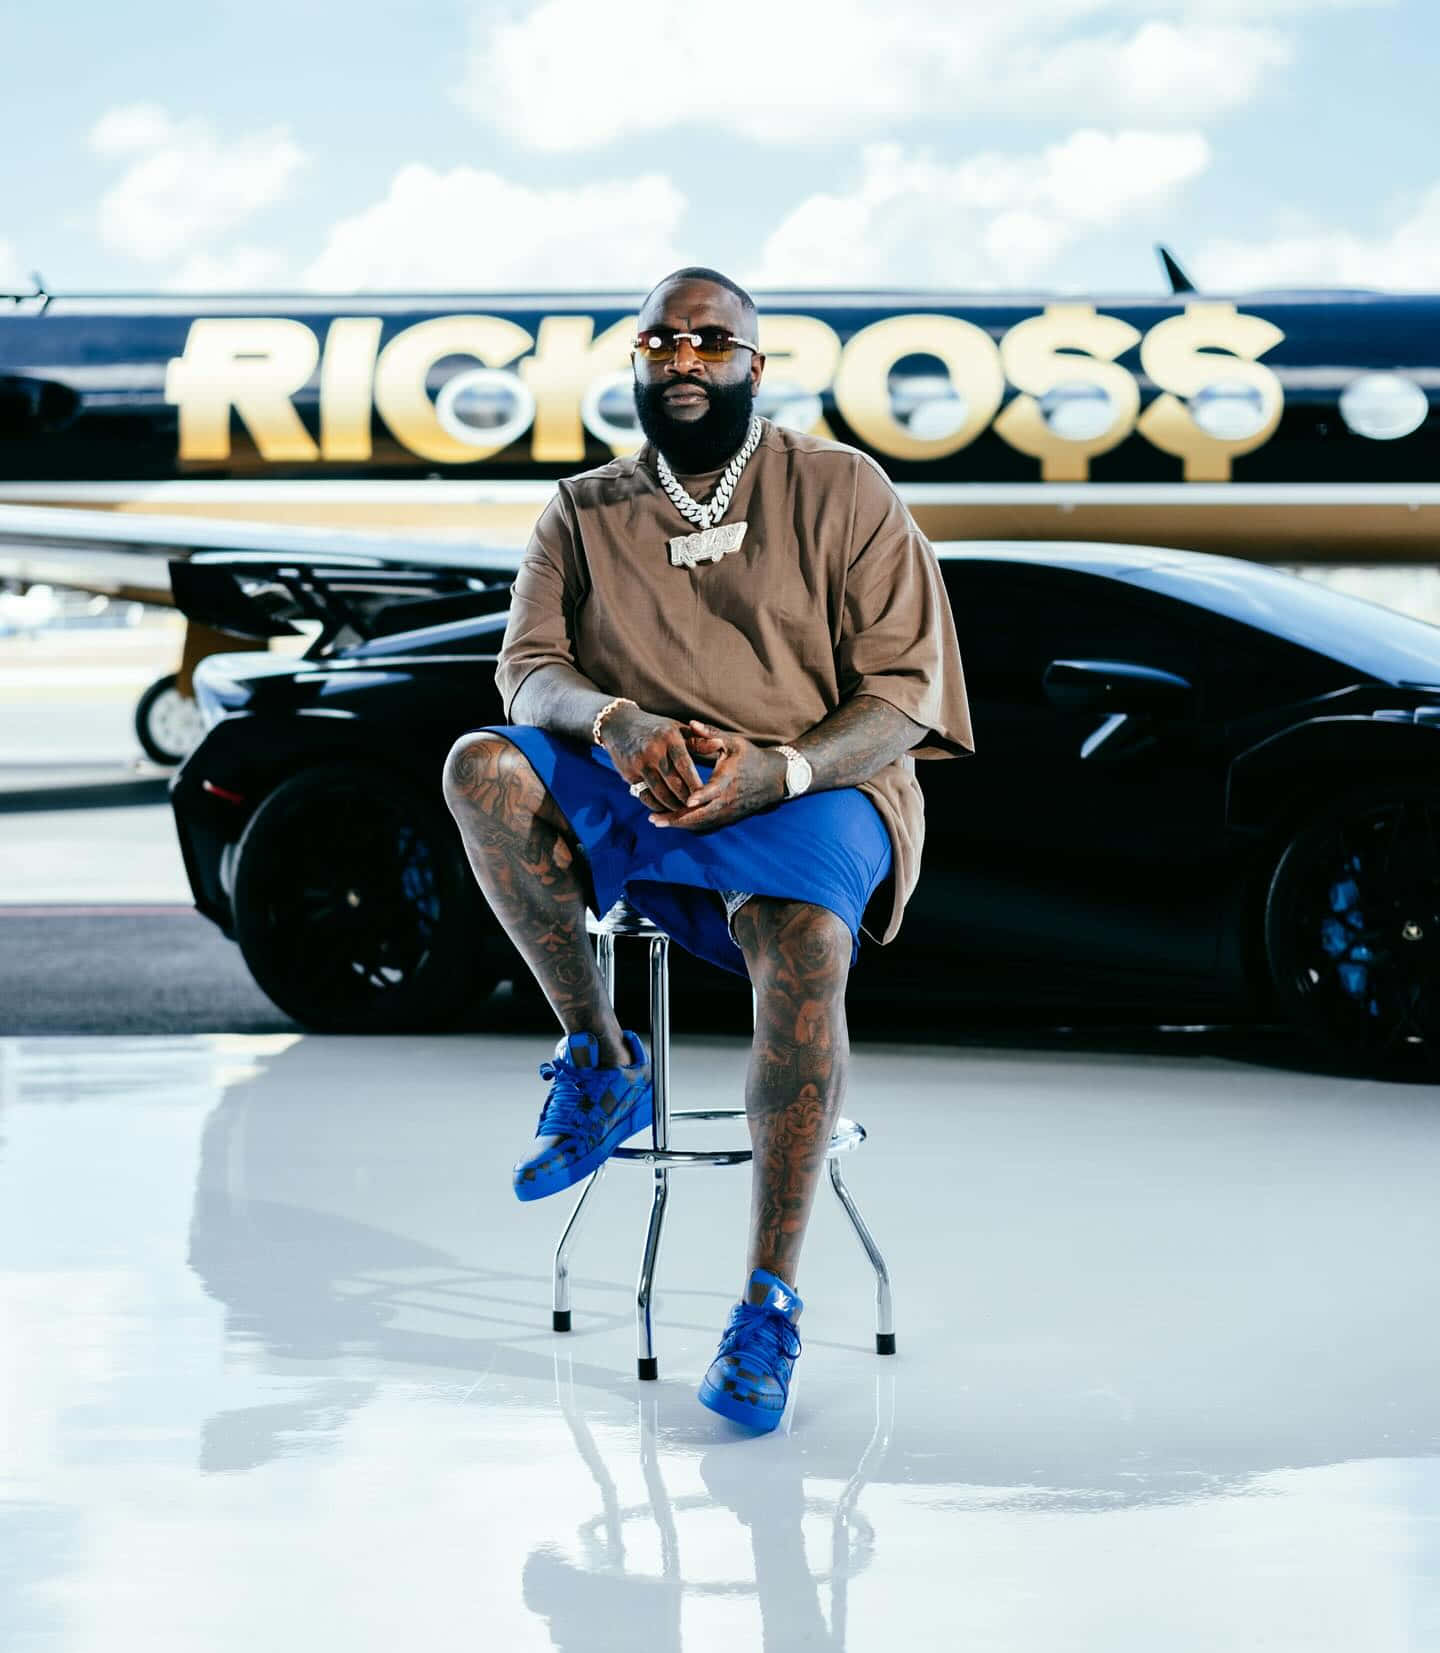 Rick Ross Stylish Pose With Private Jet And Car Wallpaper